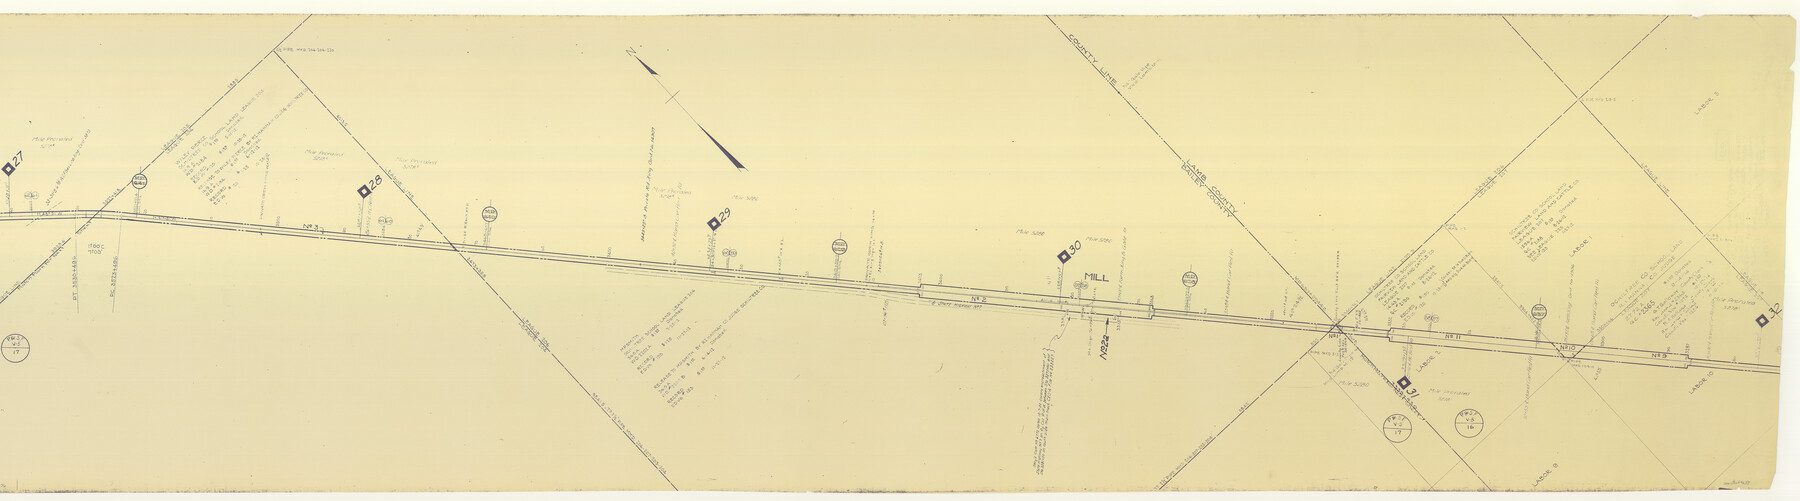 64637, [Pecos and Northern Texas Ry., Bailey Co., from Parmer Co. line through Lariat and Muleshoe to Lamb Co. line], General Map Collection